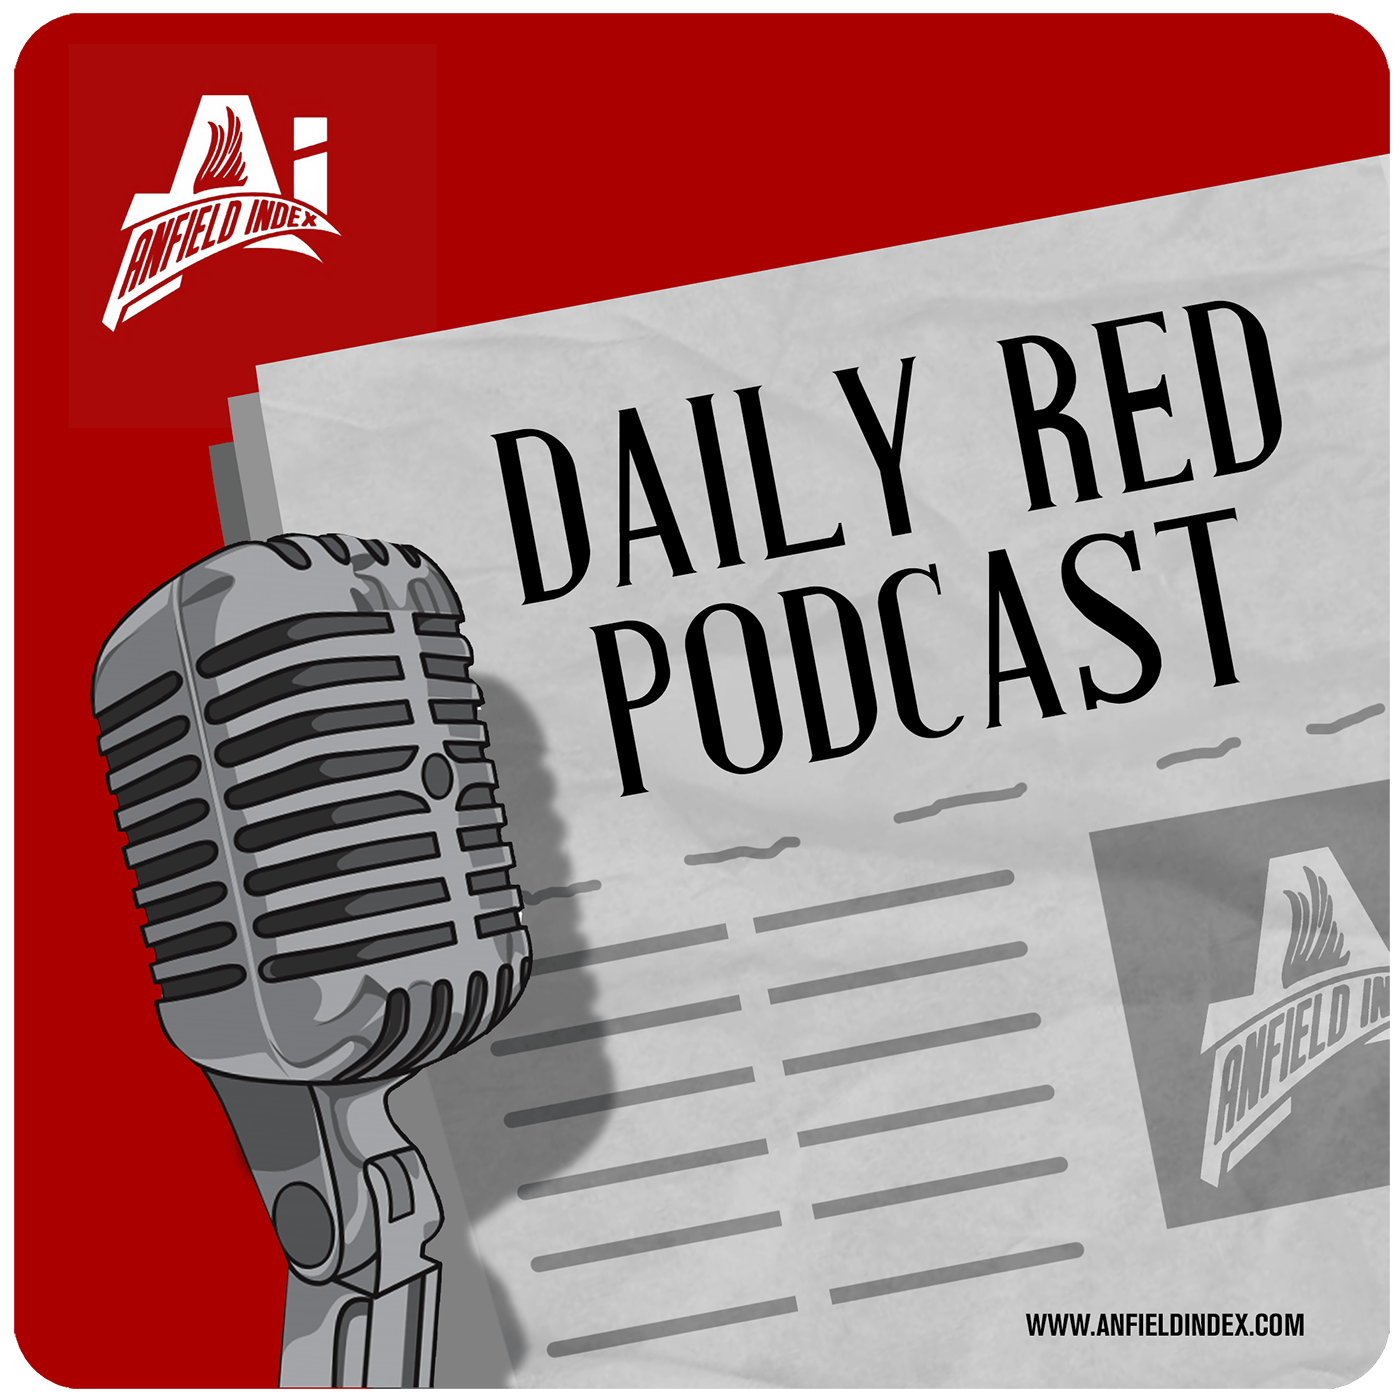 A 'Great' Week - Daily Red Podcast